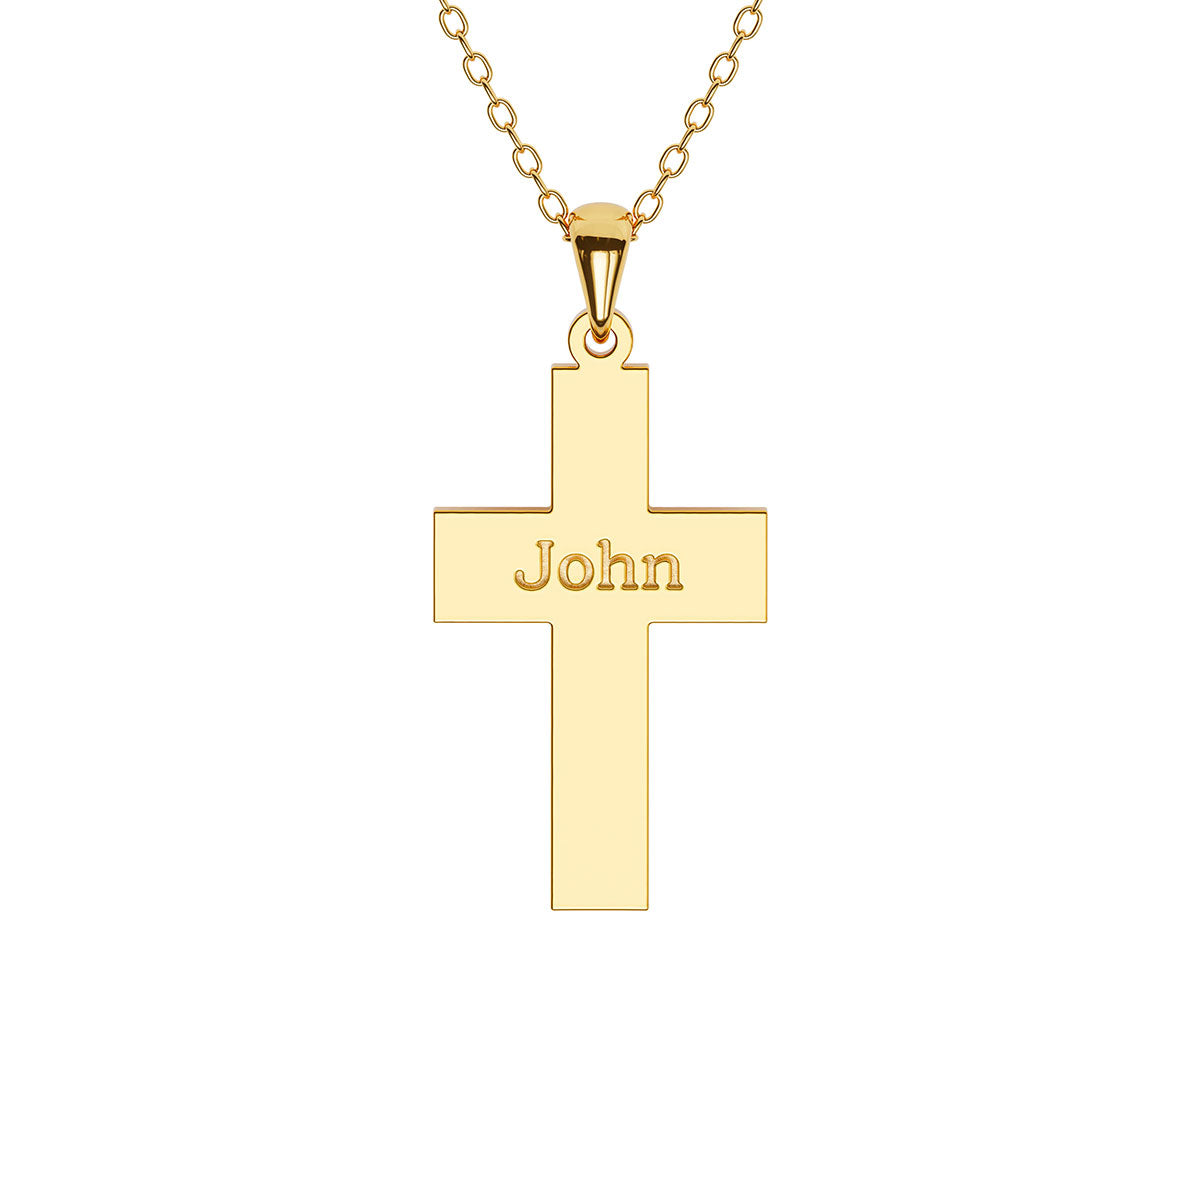 Personalized Modern Cross Necklace with Name Engraving